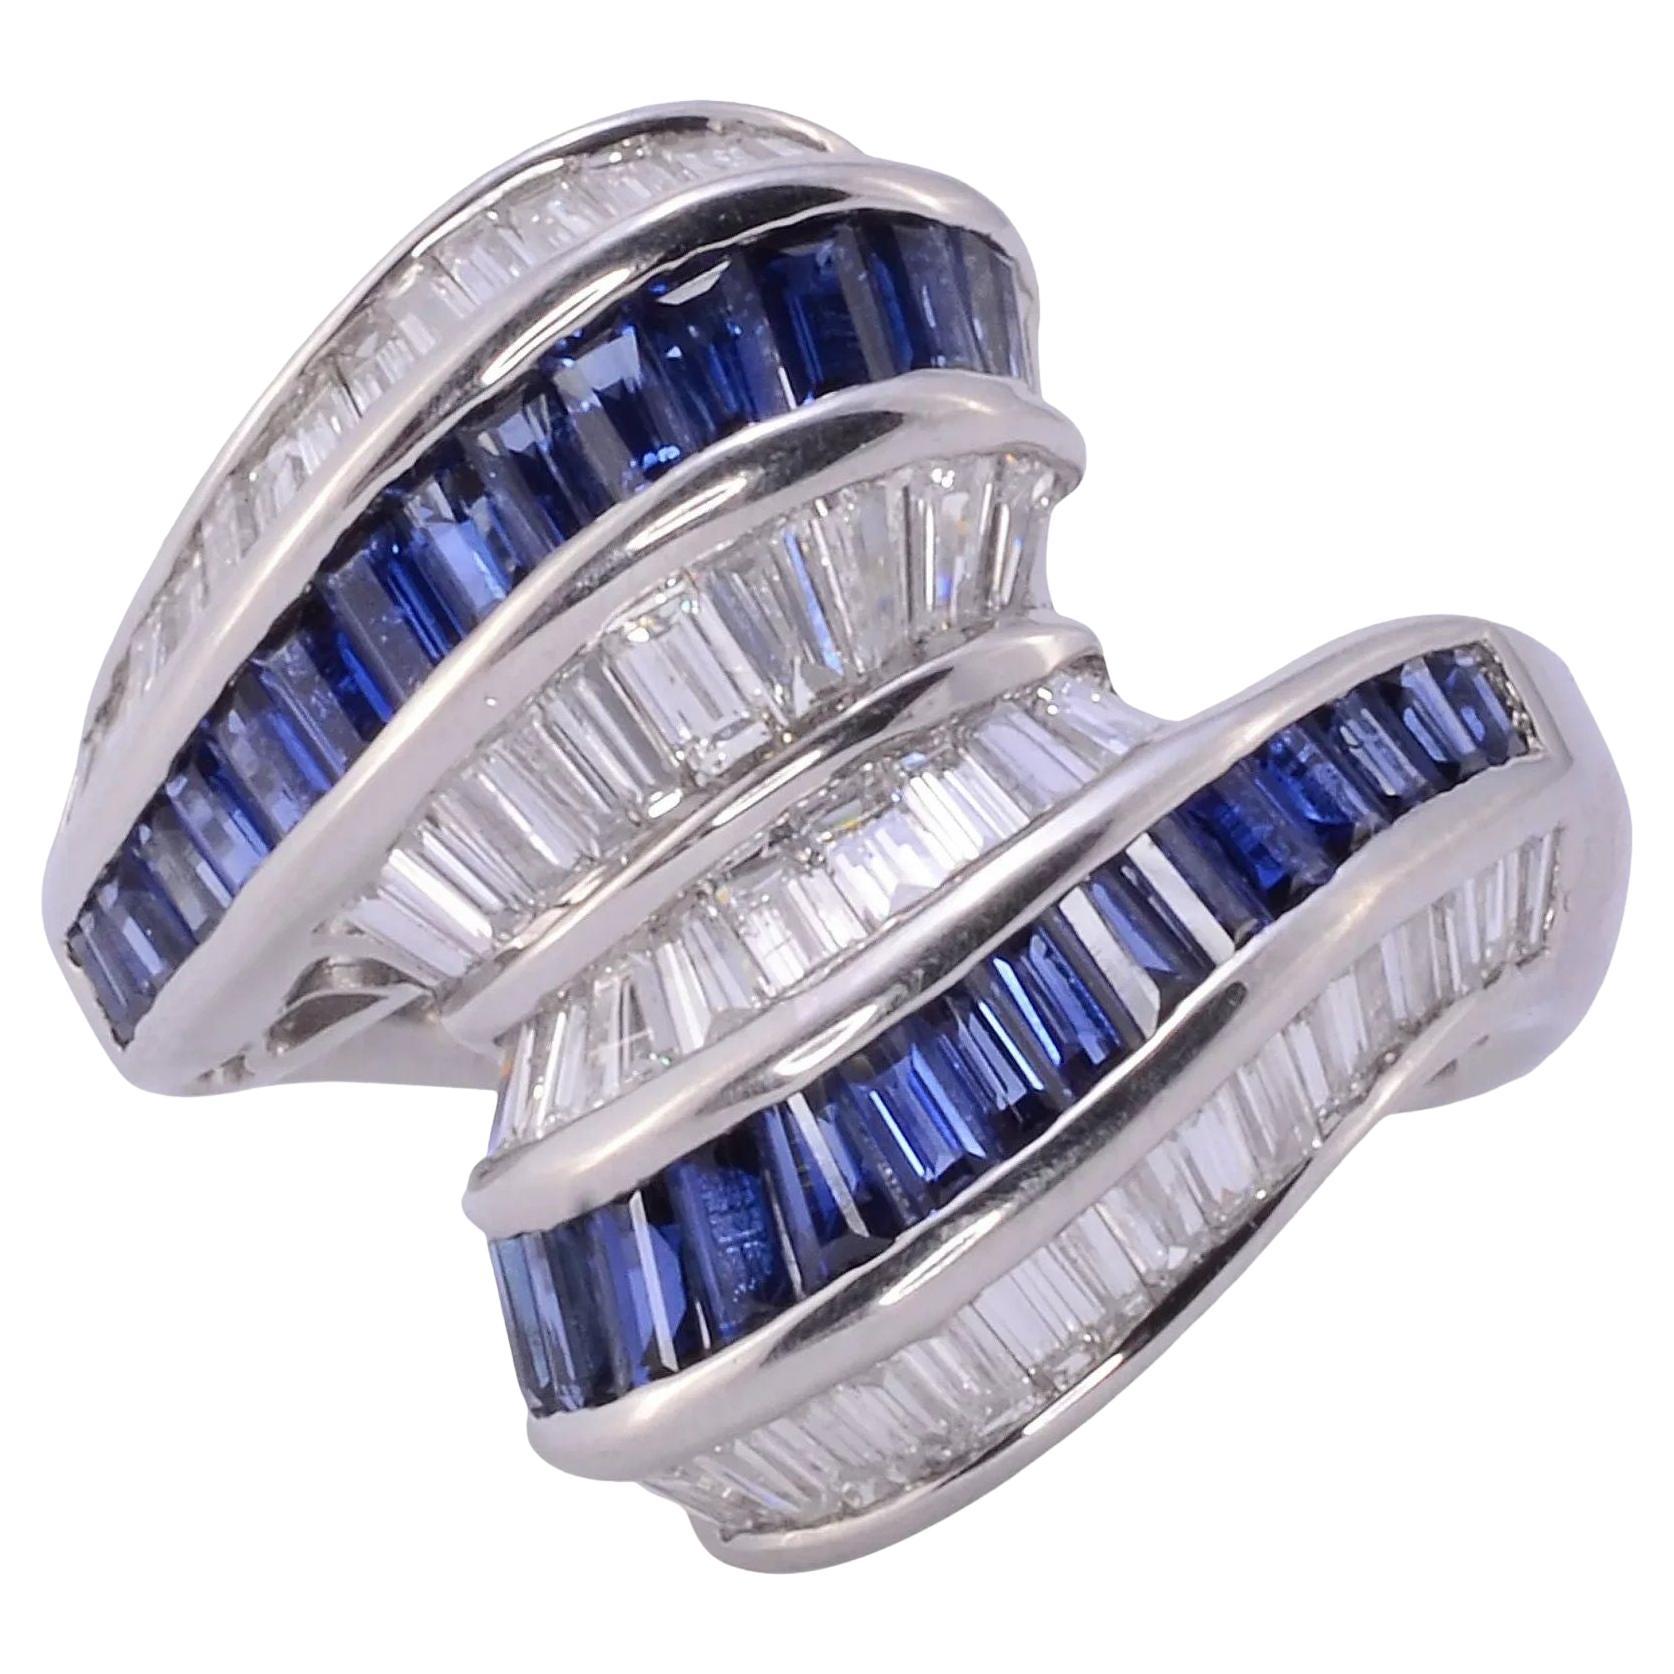 What does a sapphire wedding ring mean?